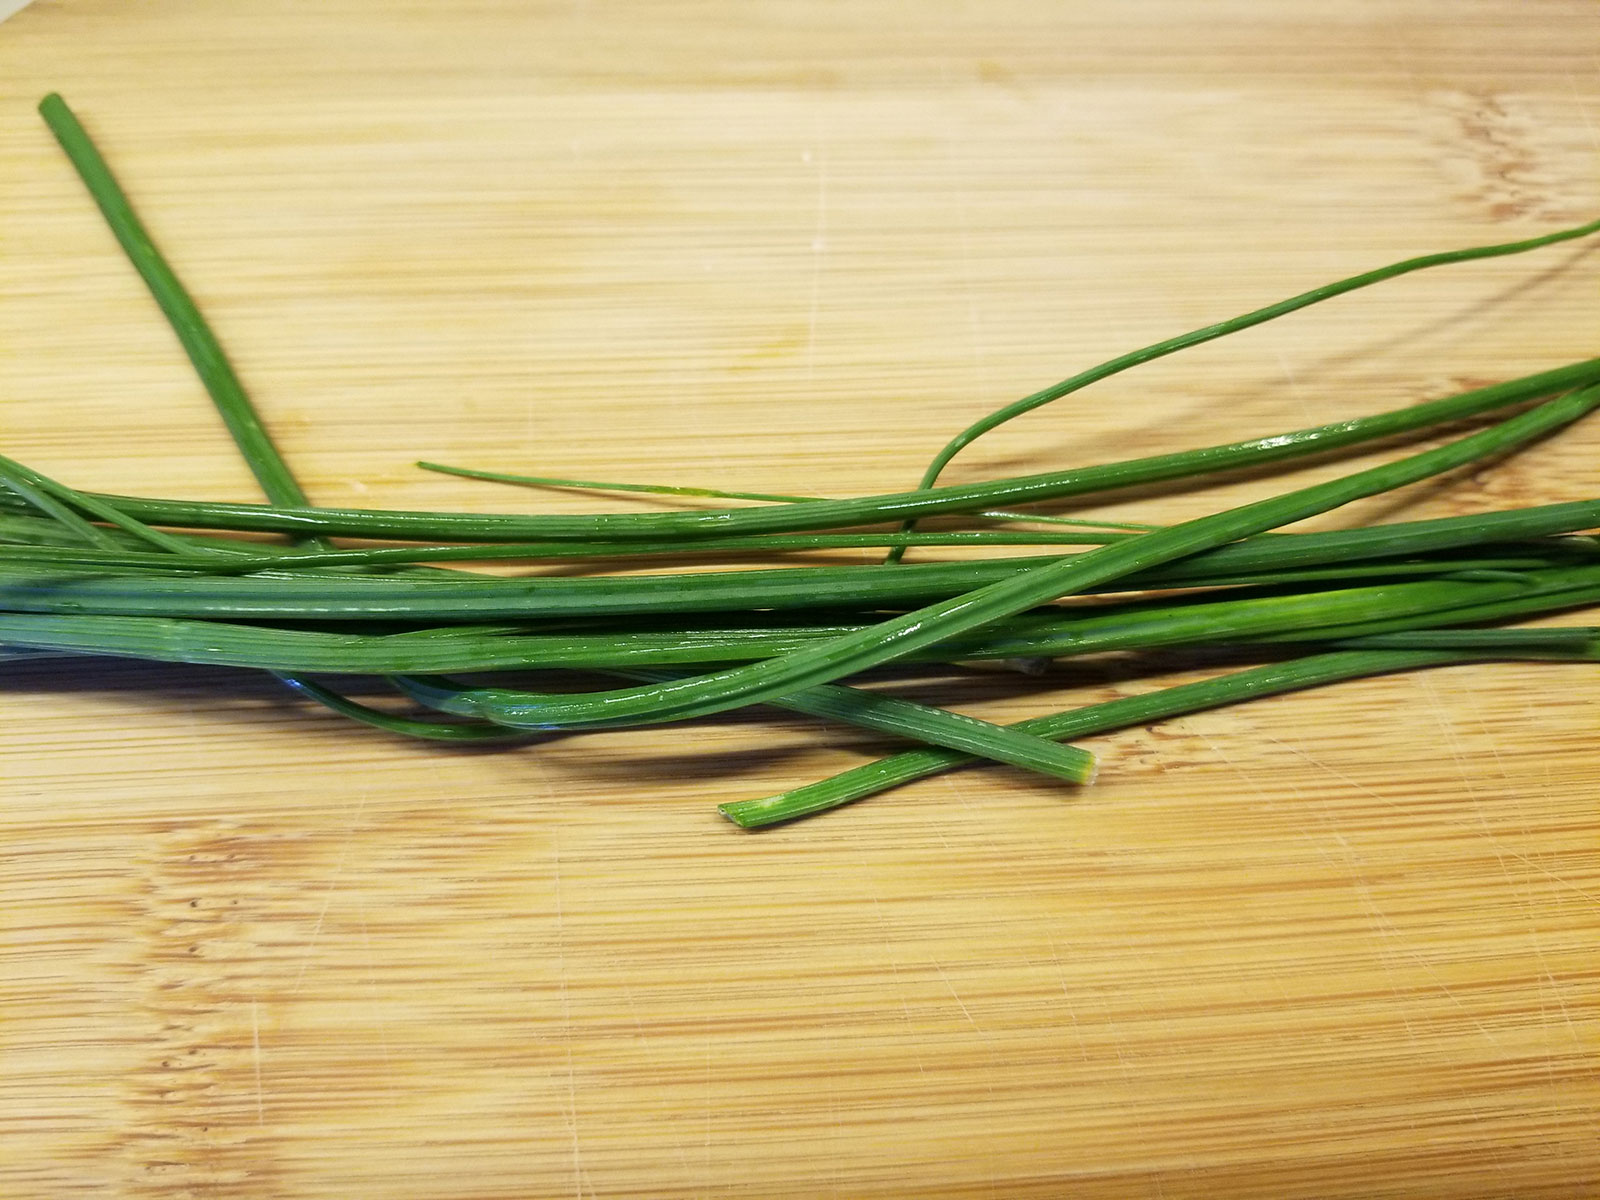 Wild onion is one of the easiest plants for beginning wild food enthusiasts to learn. It's more nutritious with a stronger flavor than regular onions.